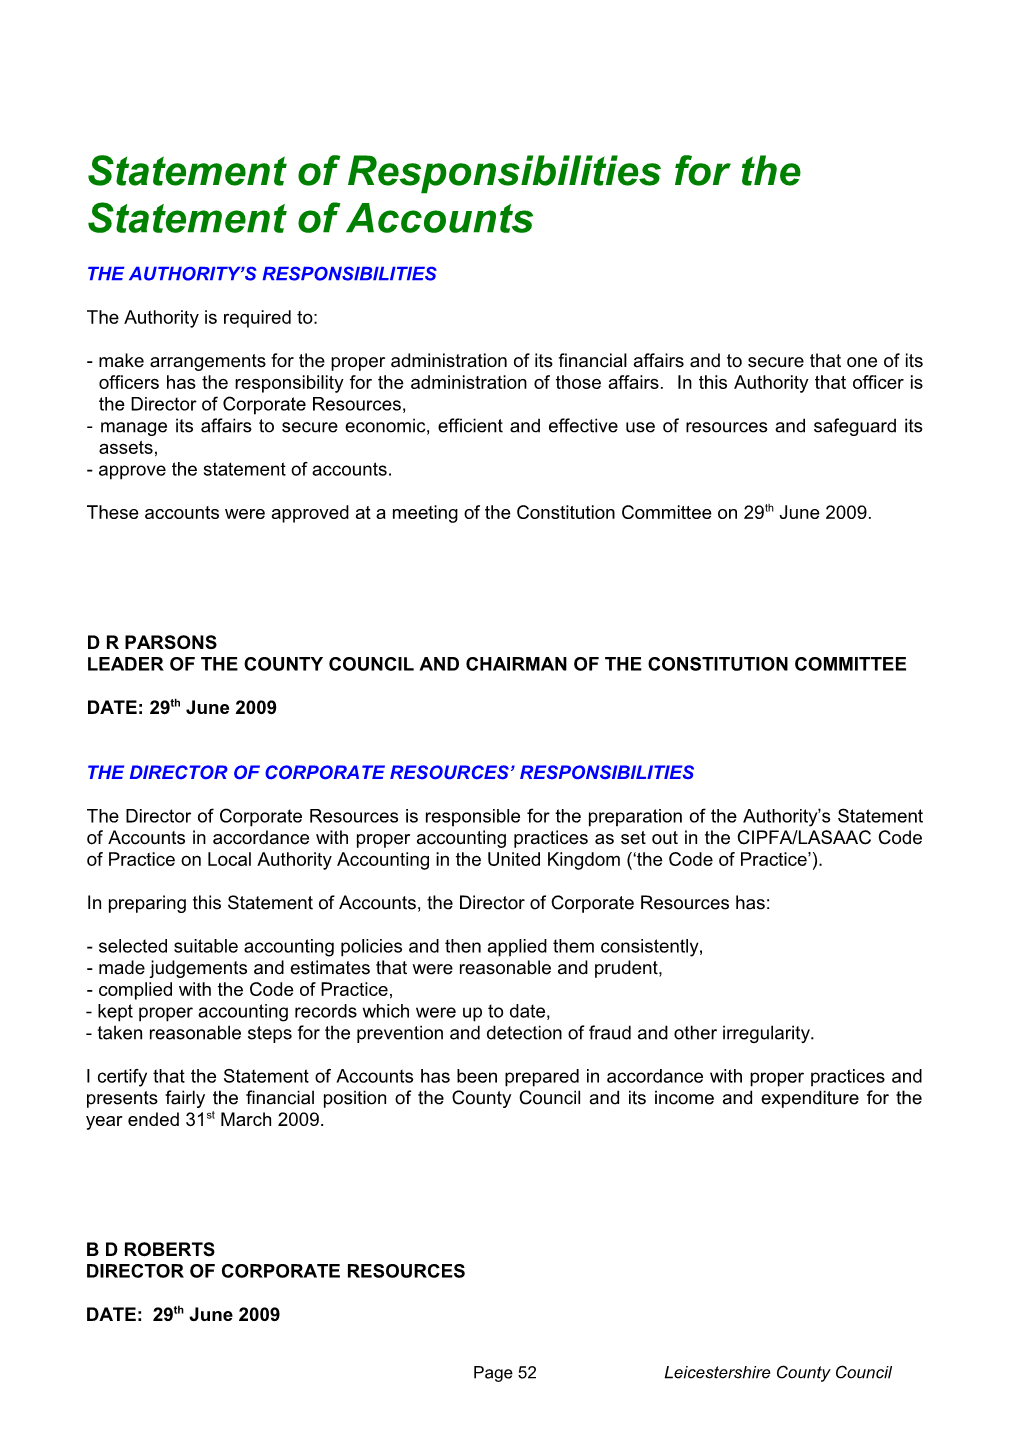 Statement of Responsibilities for the Statement of Accounts